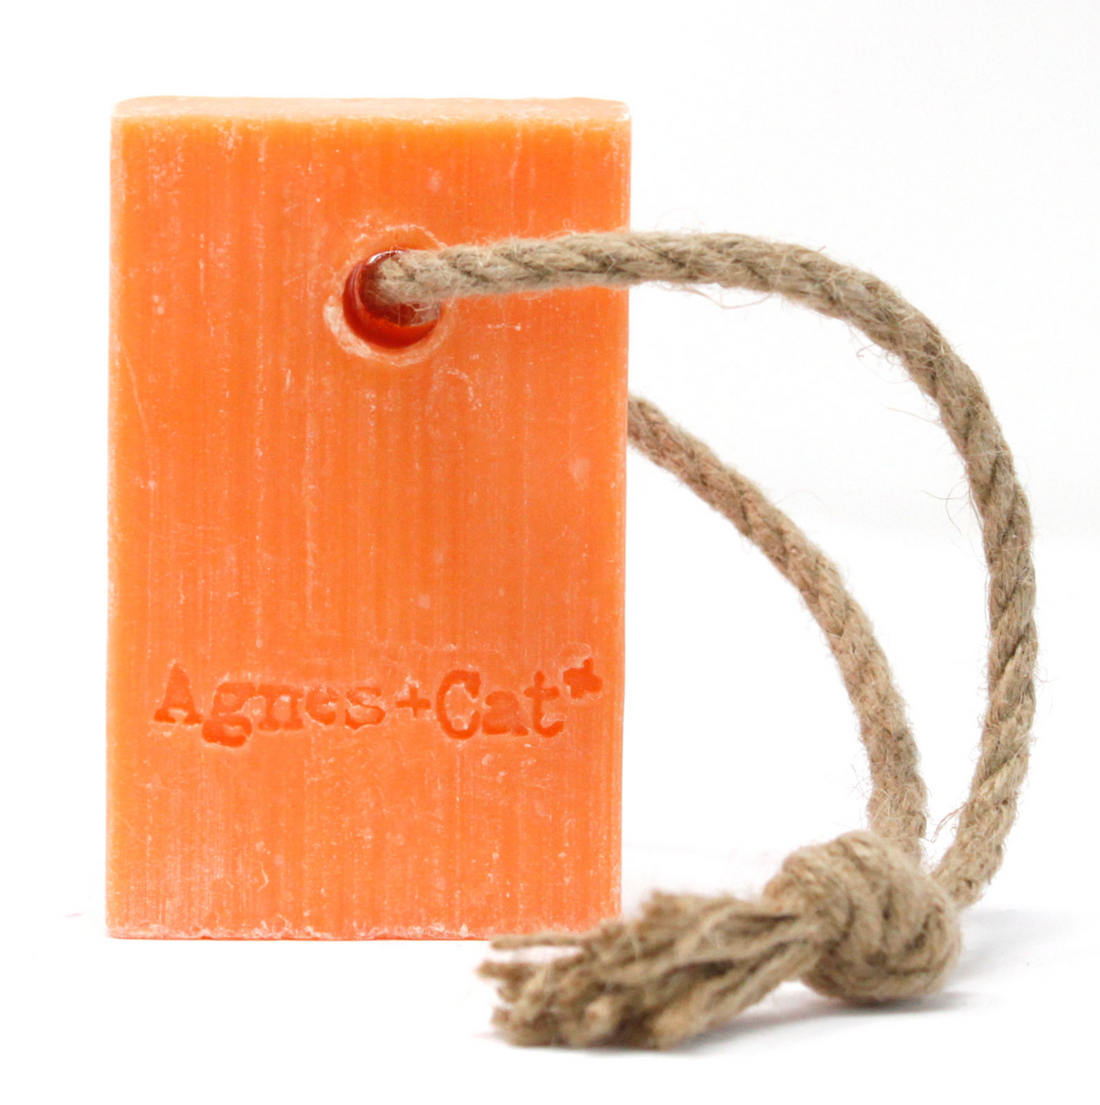 Clementine Soap on a Rope